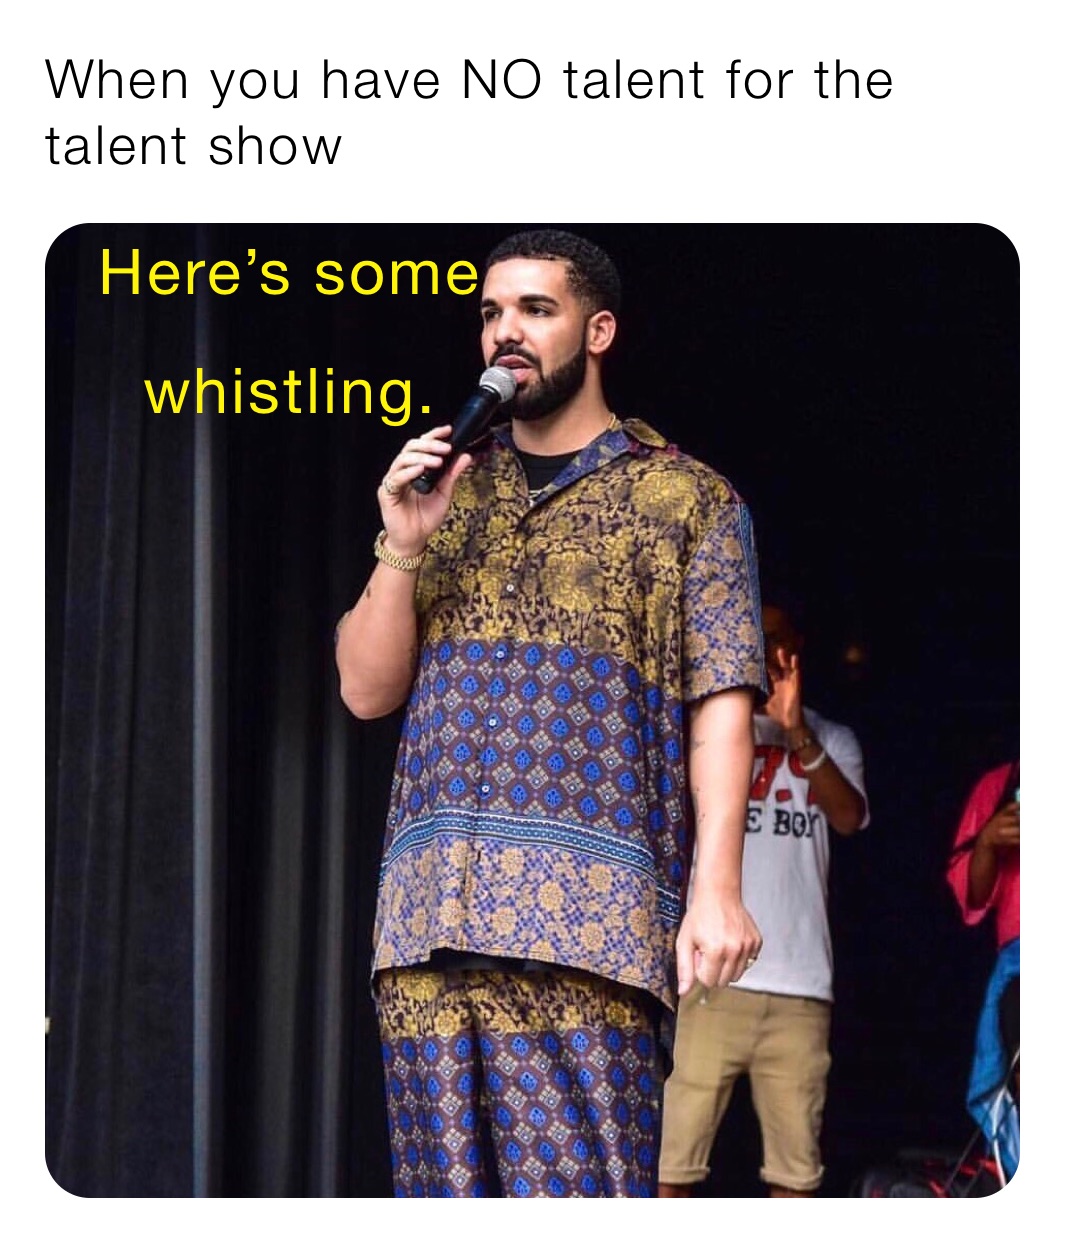 When you have NO talent for the talent show